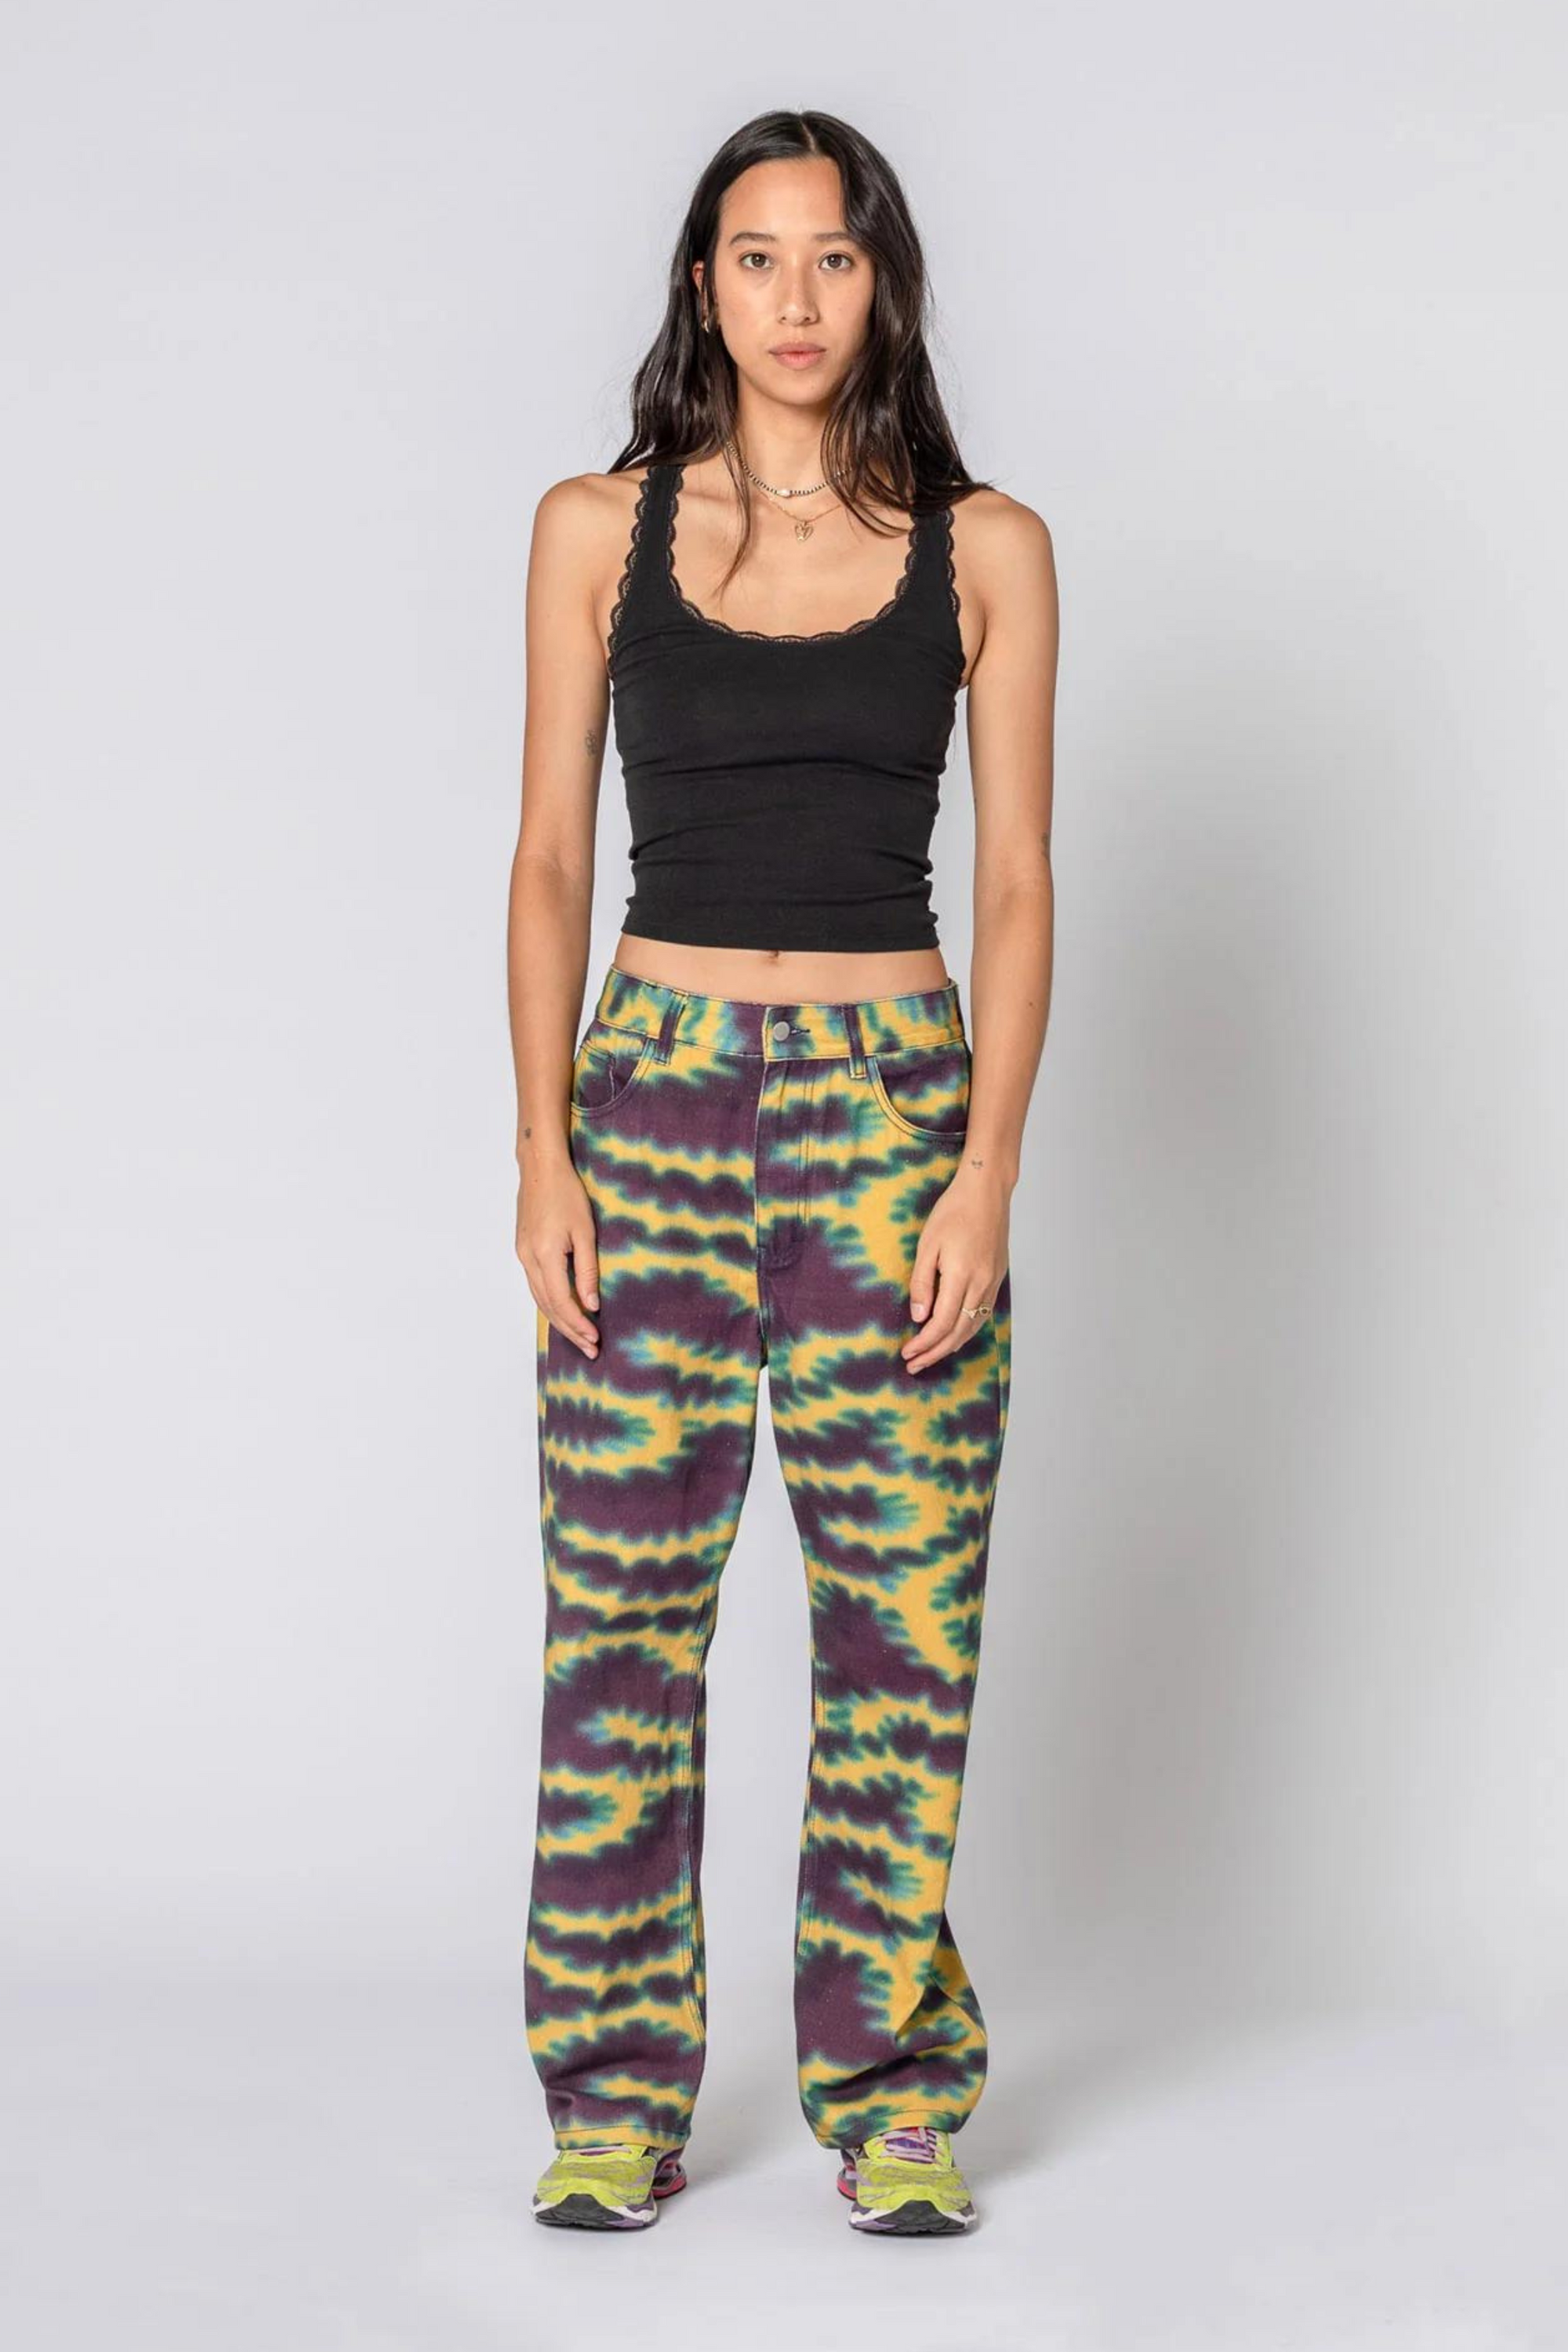 Silent Morning Plum Recovery Pants